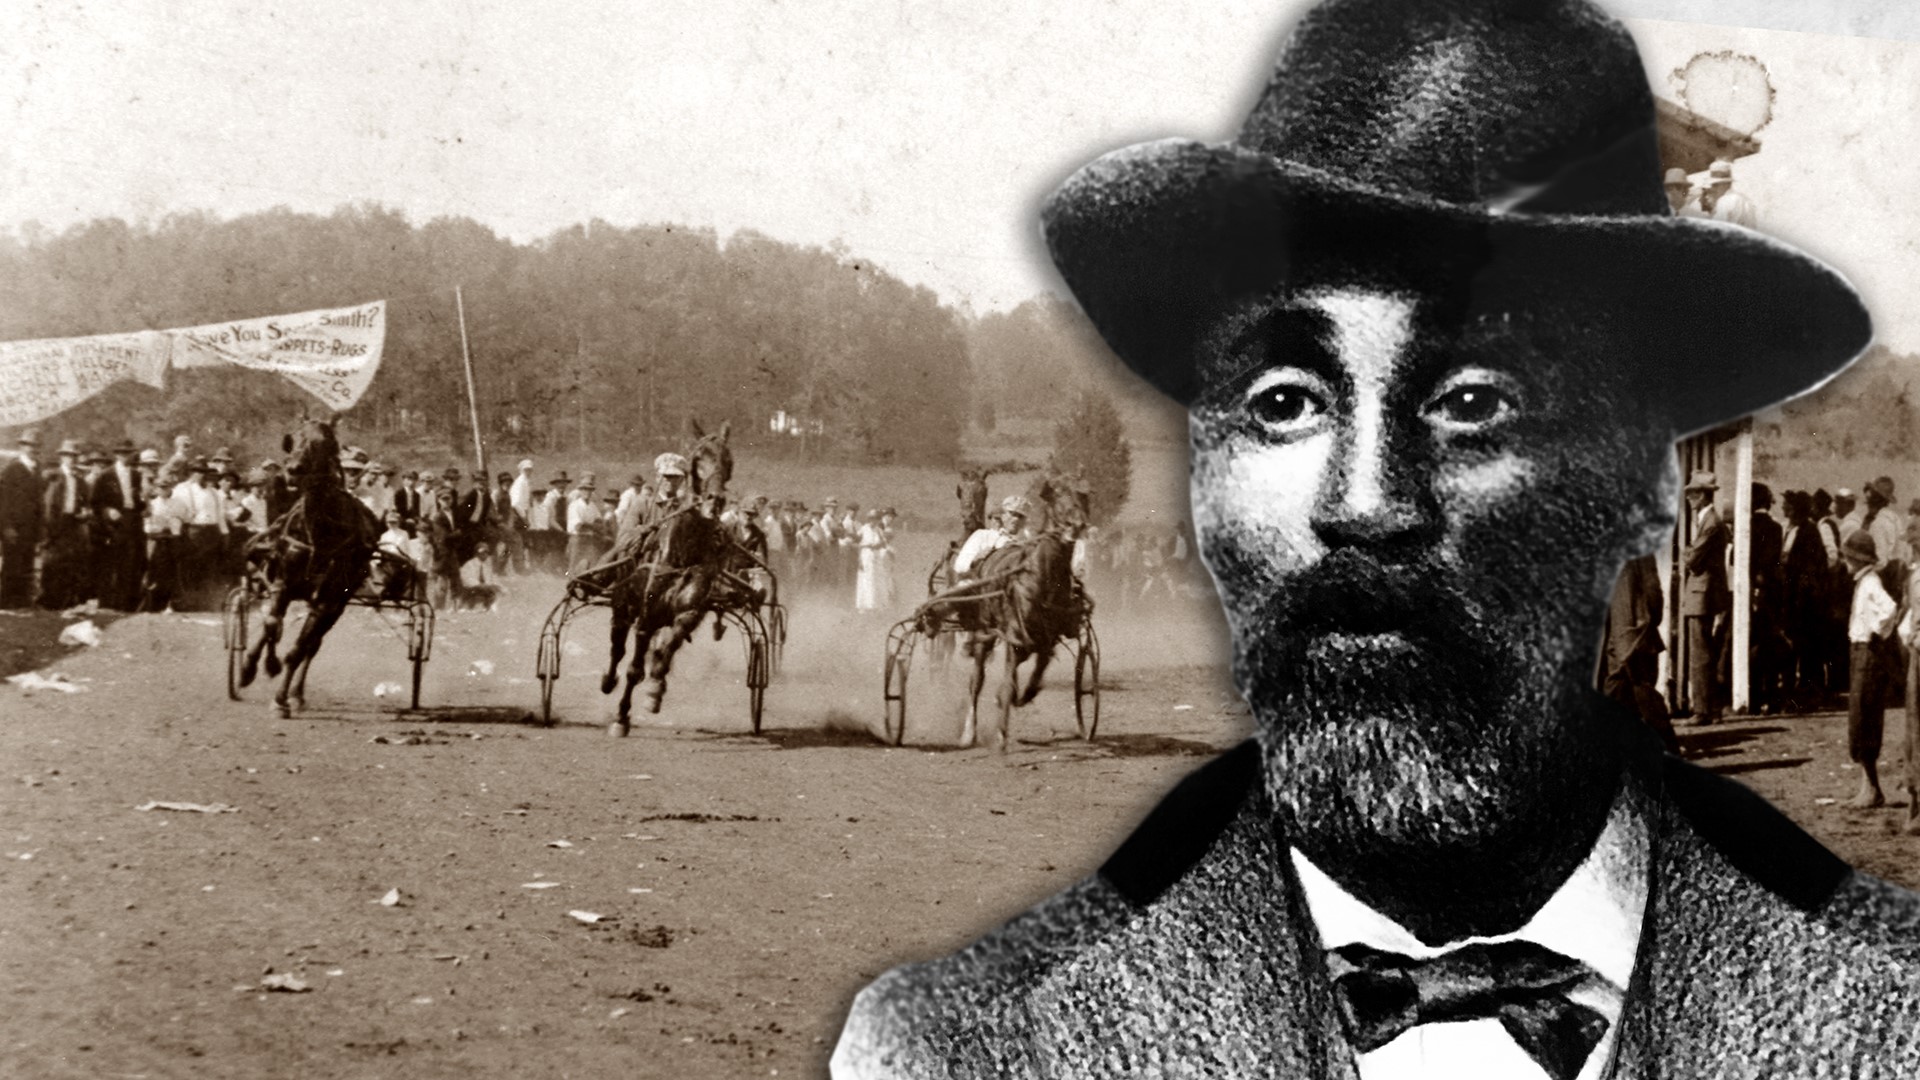 Cal Johnson's life began as a slave in Knoxville. He died one of the richest black men in South, famous for owning saloons, race tracks, and fine race horses.